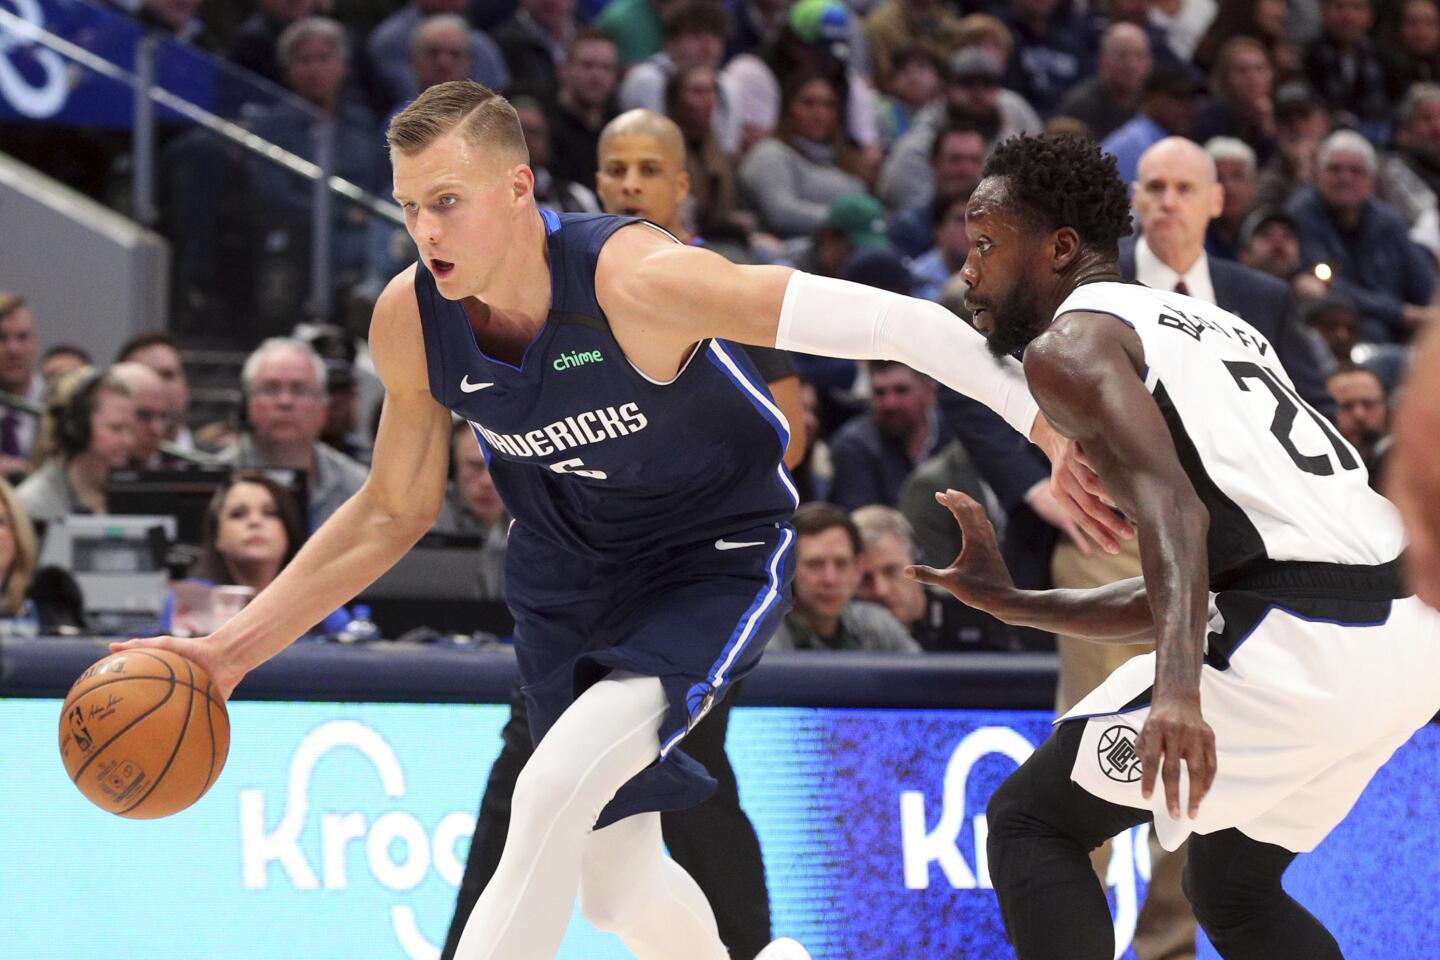 Mavericks forward Kristaps Porzingis drives against Clippers guard Patrick Beverley during the first half of a game Jan. 21.